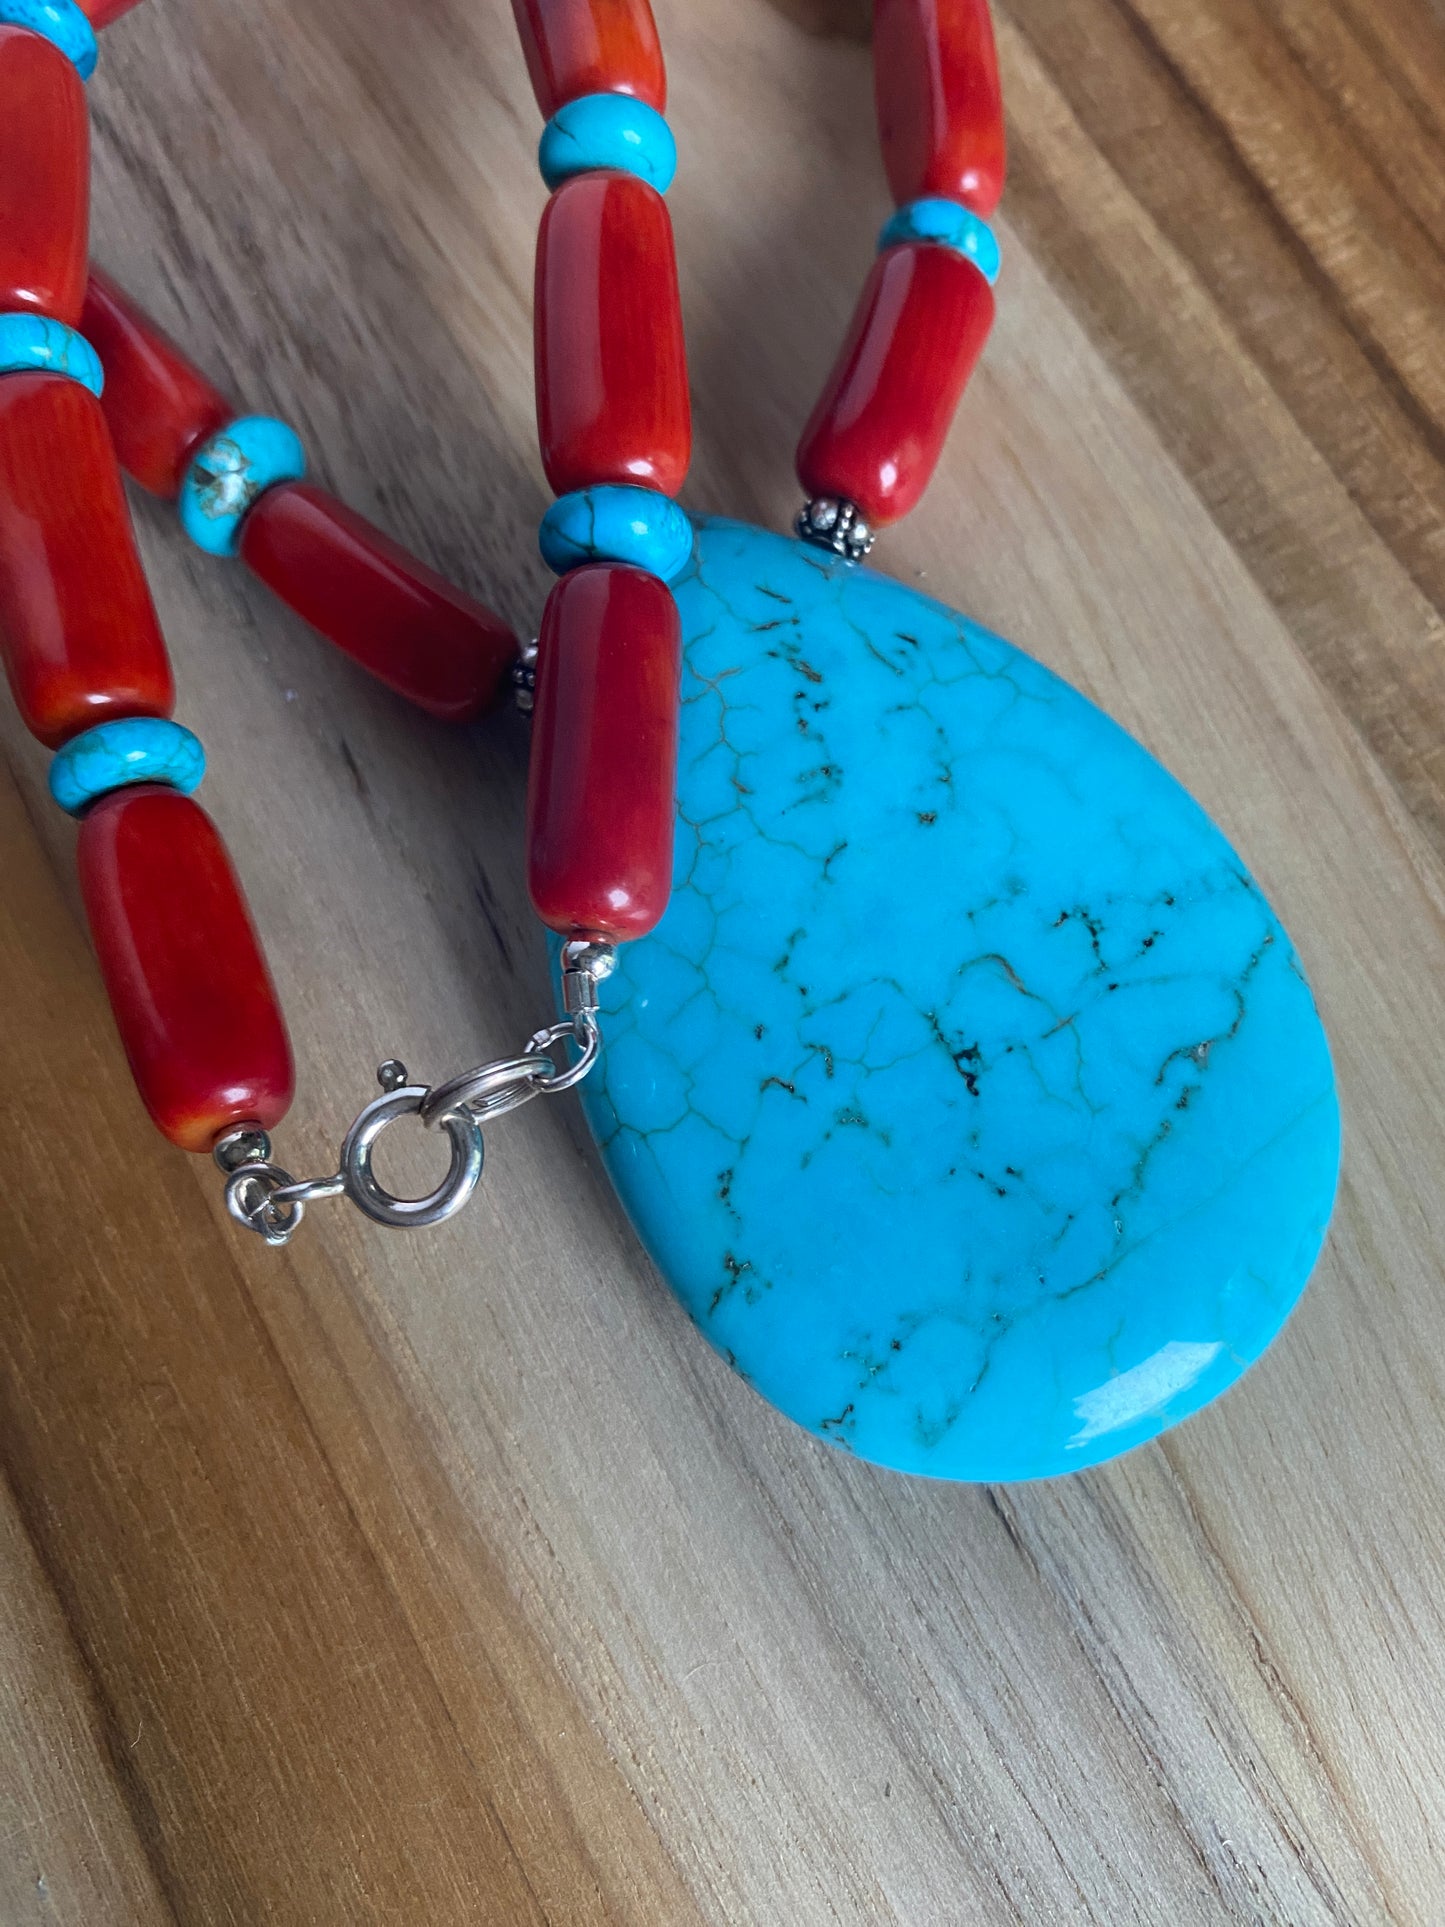 17" Long Turquoise Beaded Pendant Necklace with Red Tube Beads - My Urban Gems